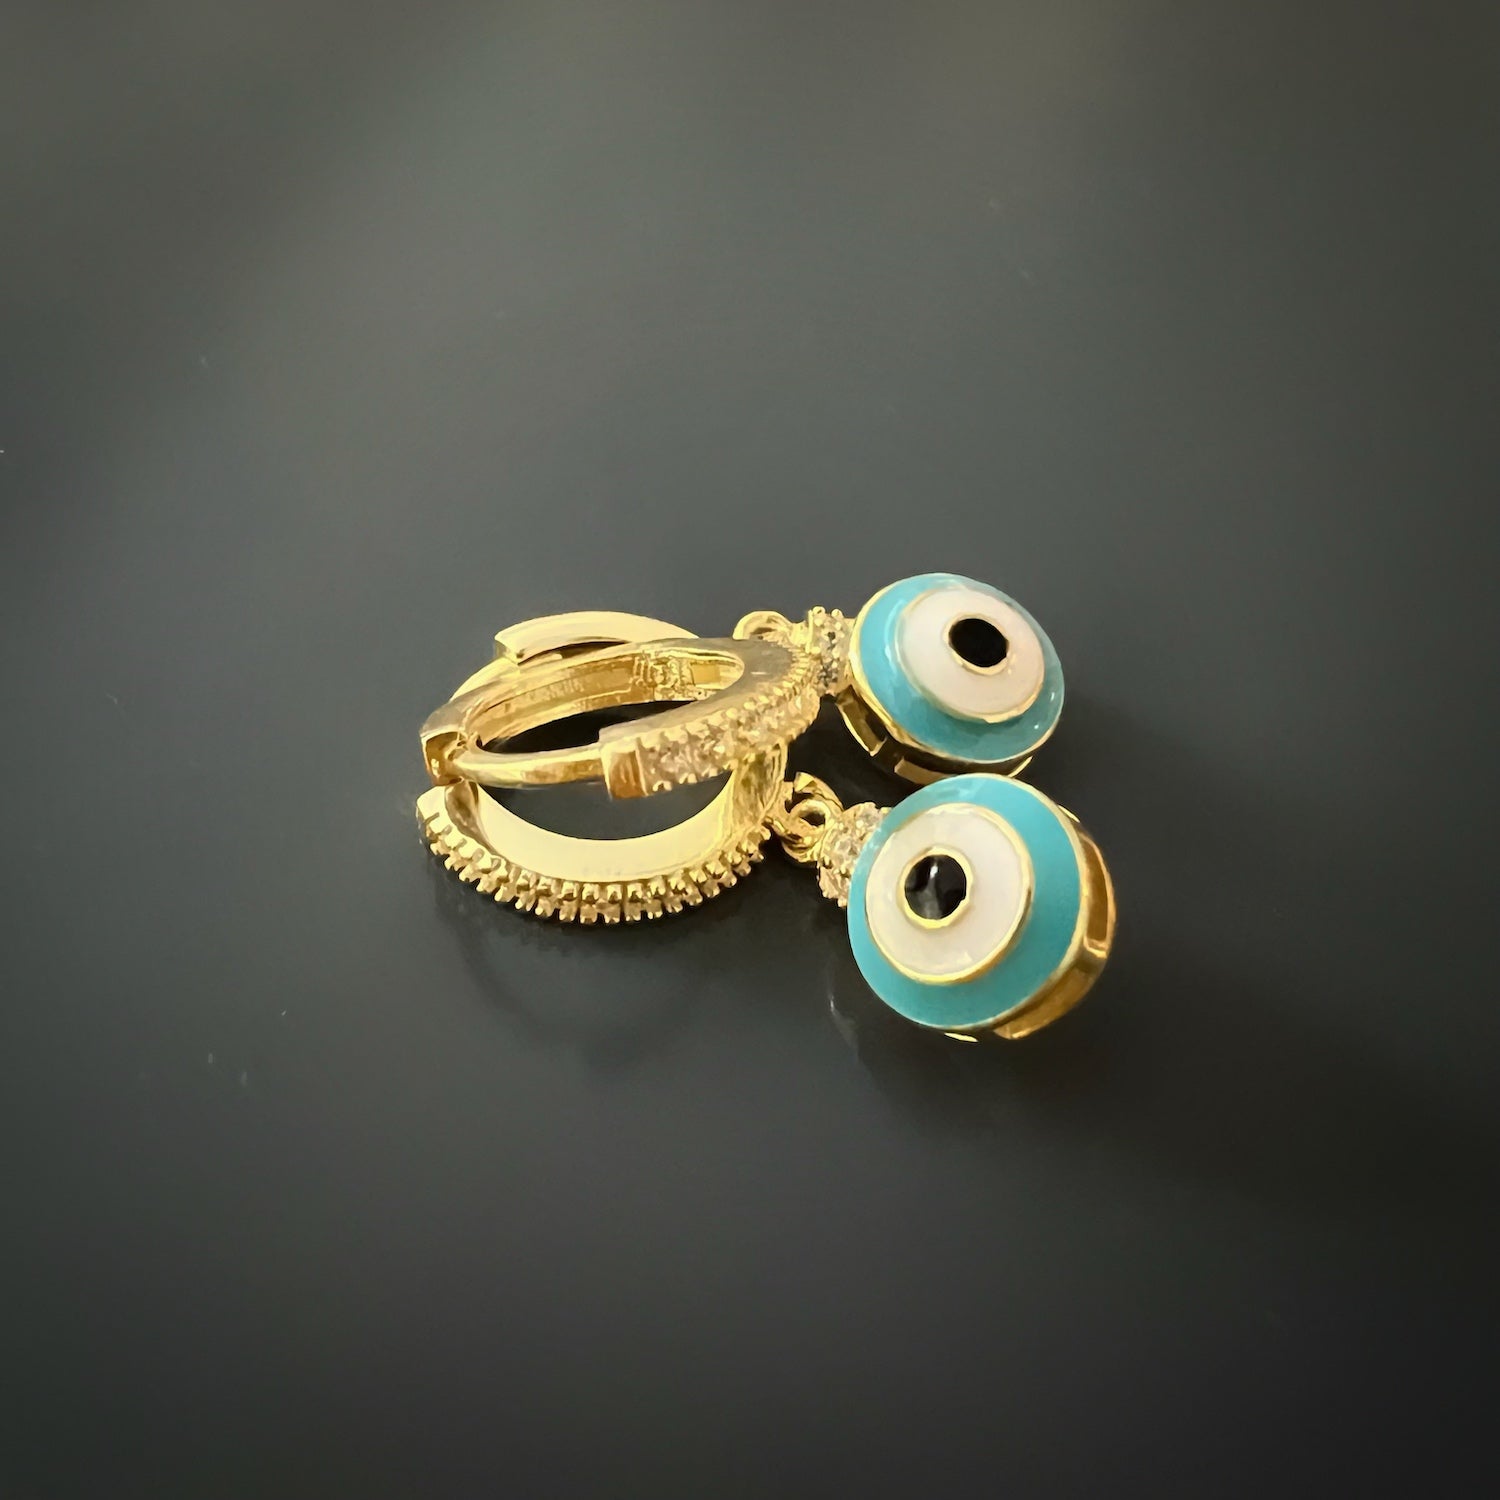 Stylish and meaningful earrings designed with turquoise enamel and zircon stones